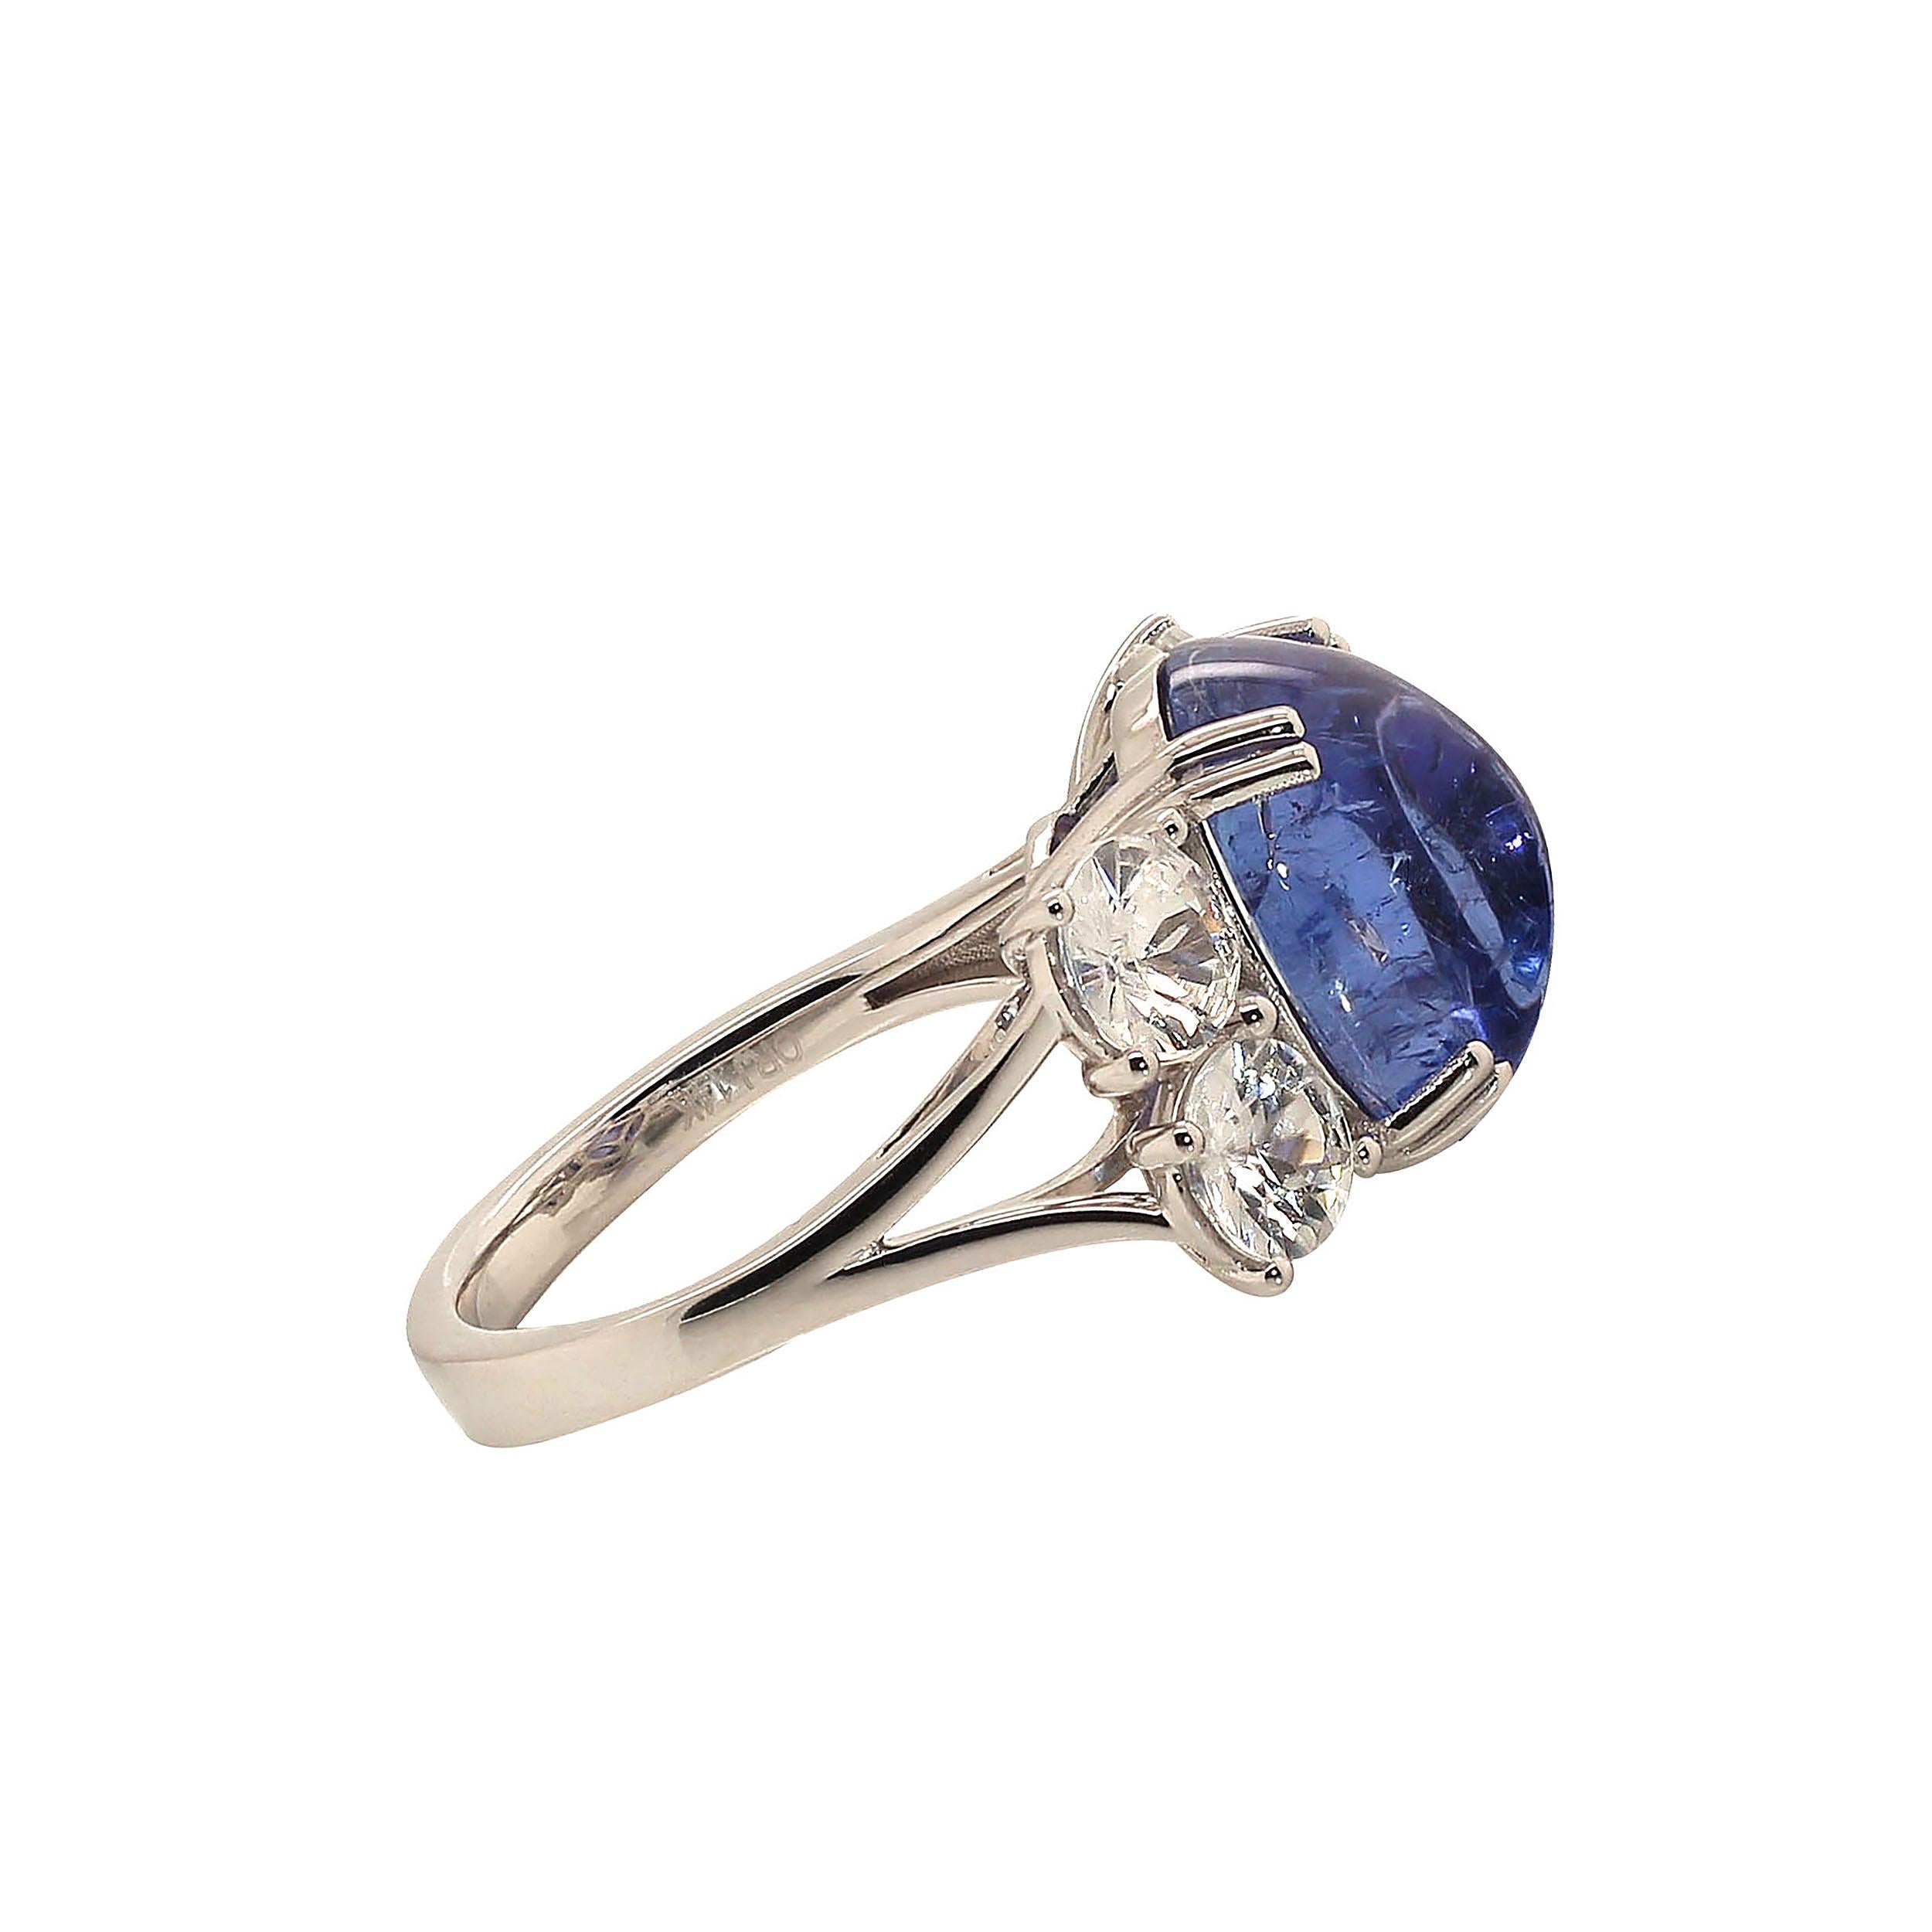 Women's or Men's AJD Dinner Ring of Cabochon Tanzanite and Sparkling Genuine Zircons For Sale